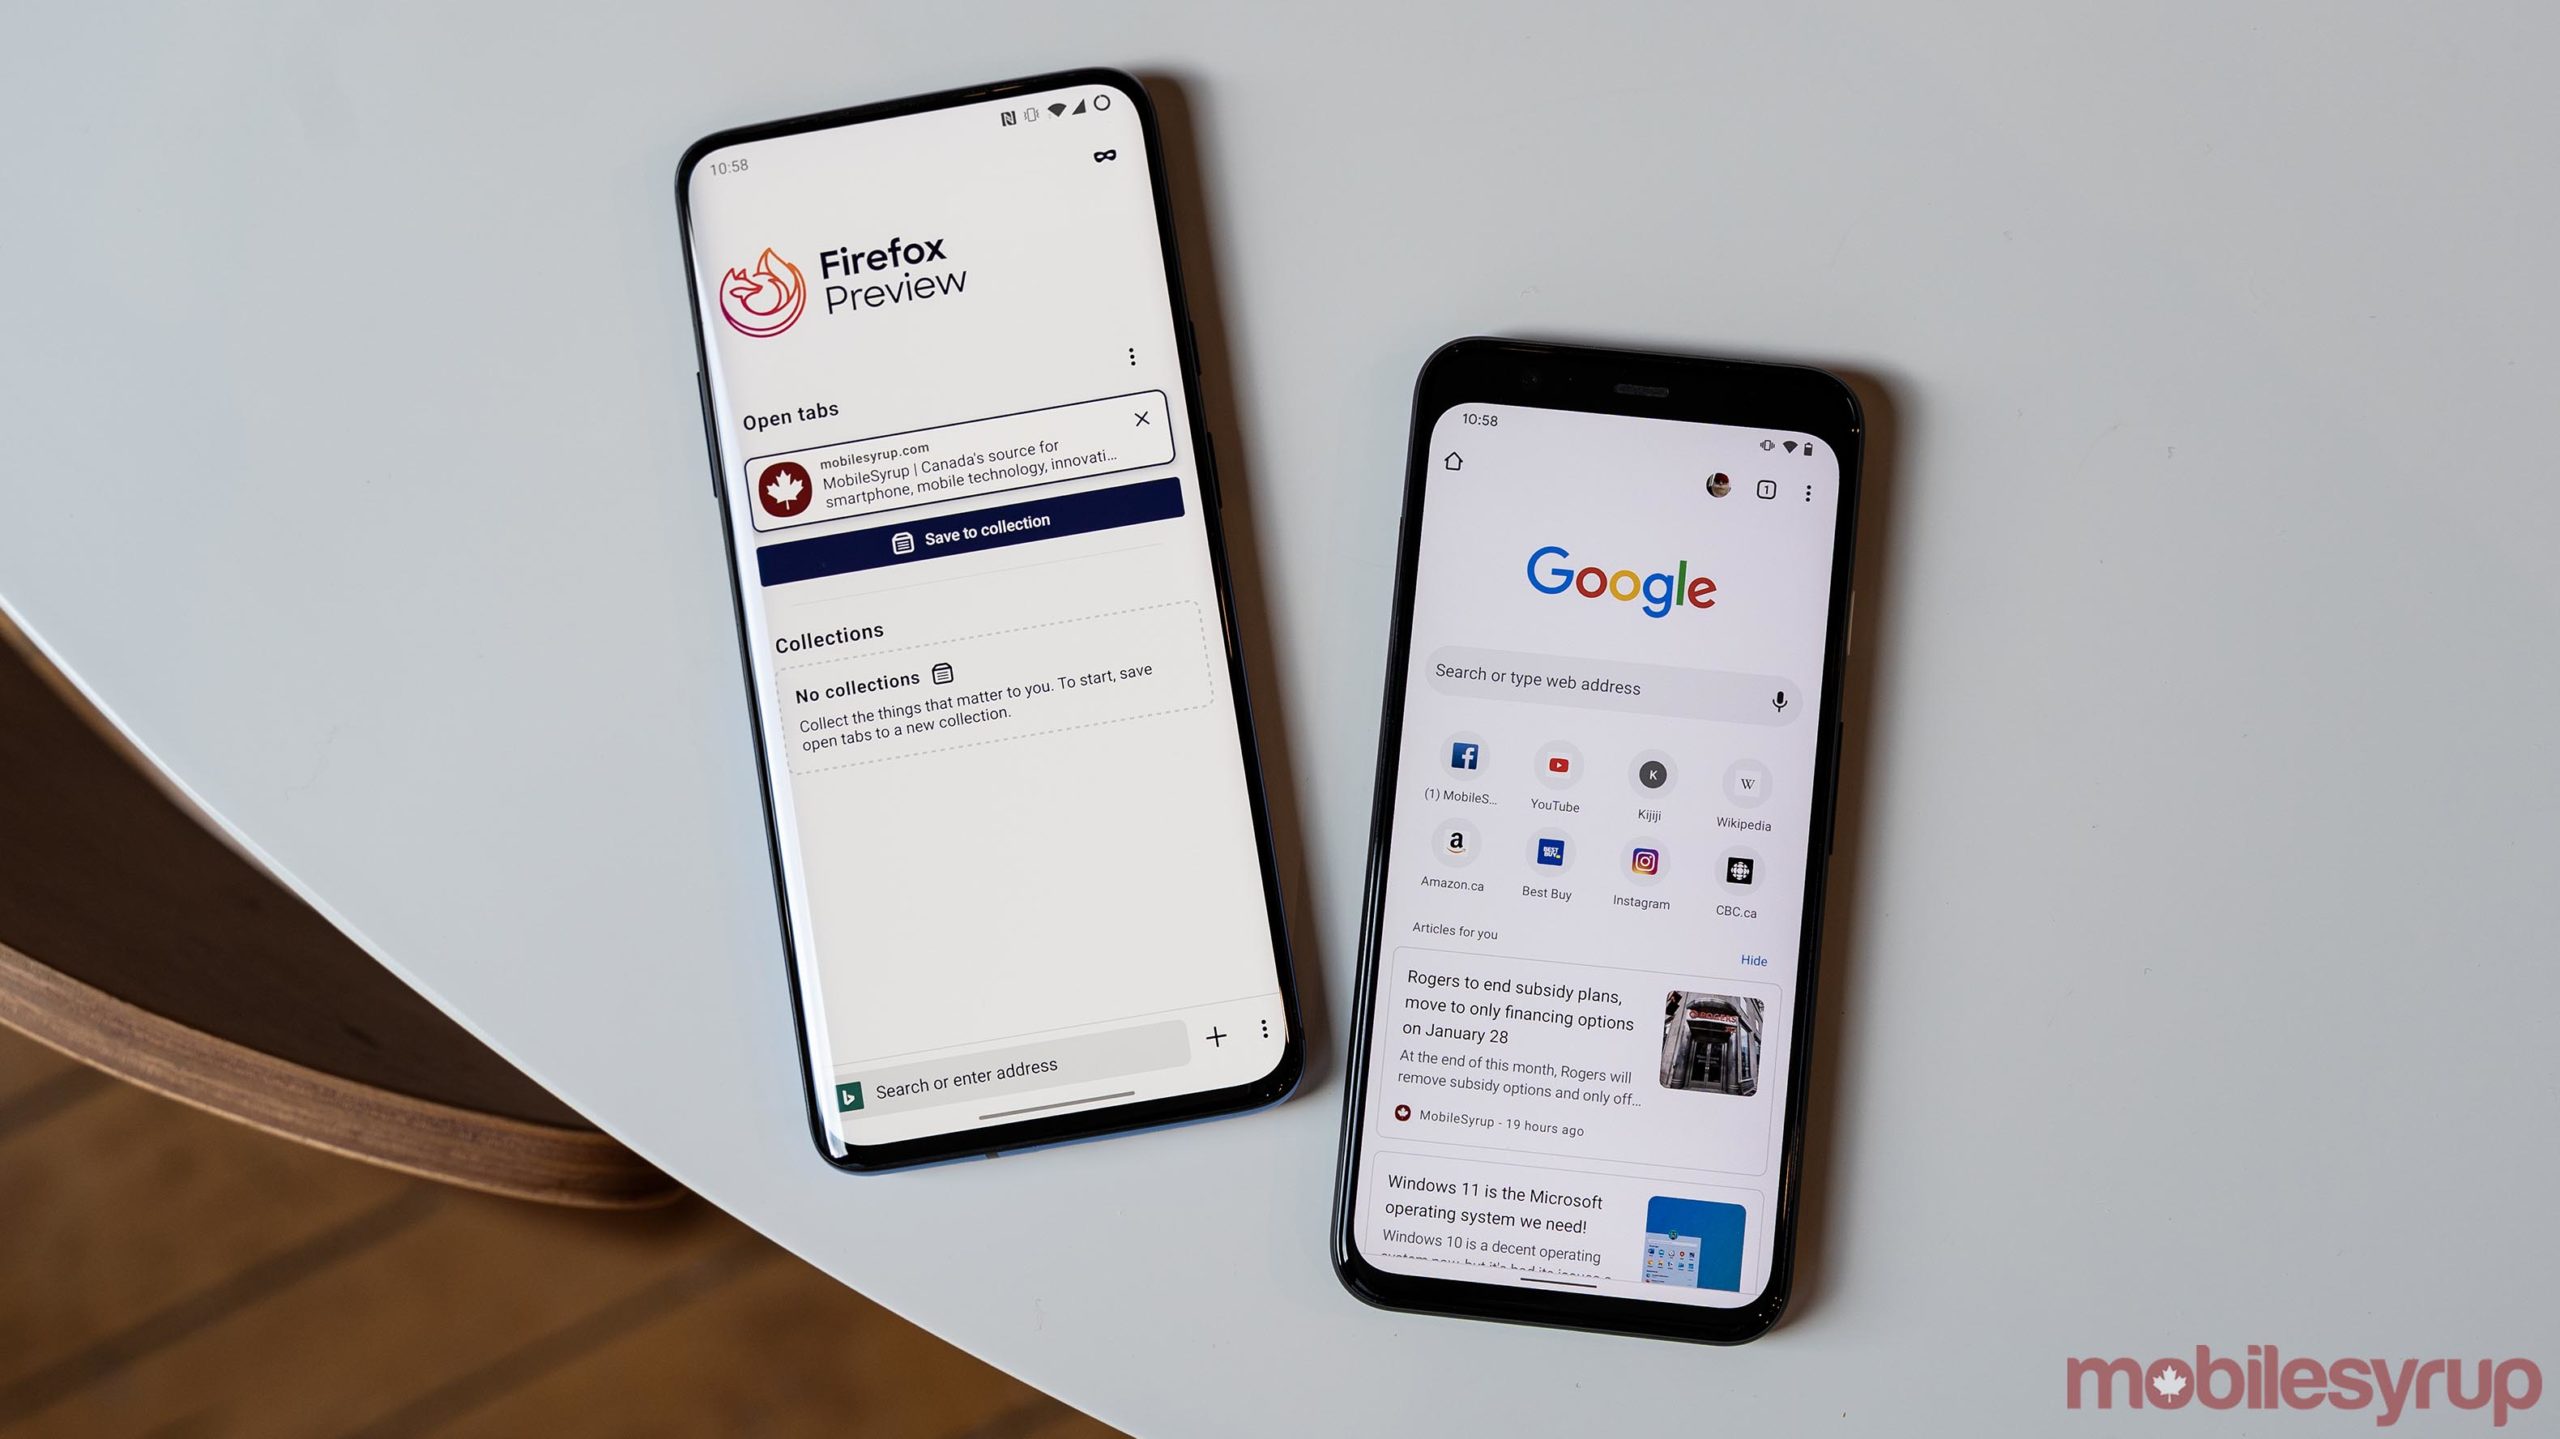 Firefox and Chrome on mobile